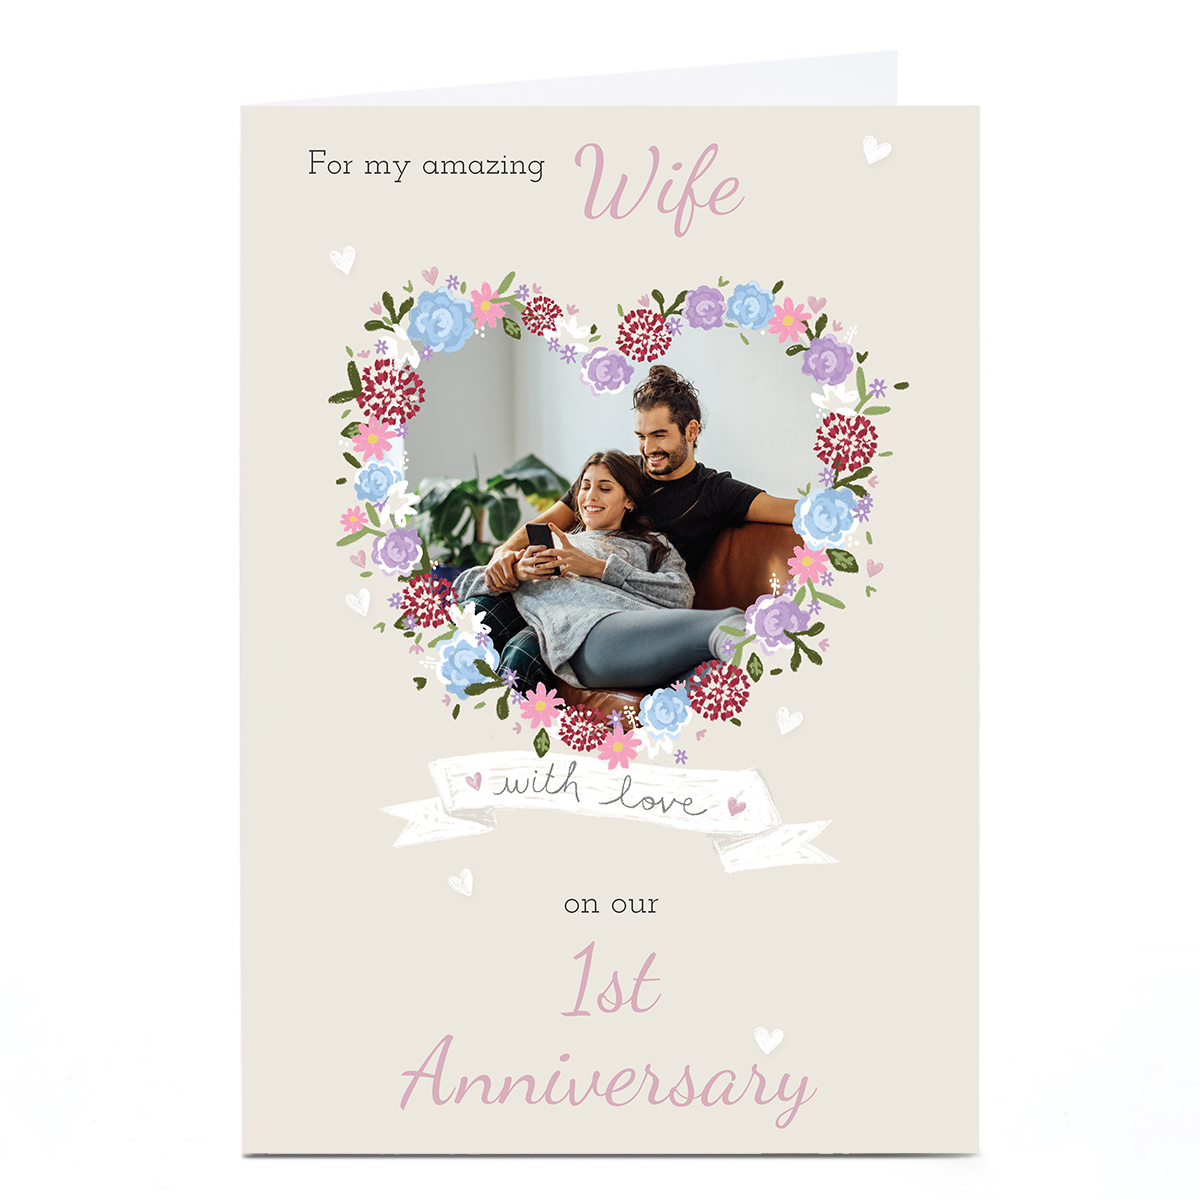 Photo Kerry Spurling 1st Anniversary Card - Flower Heart